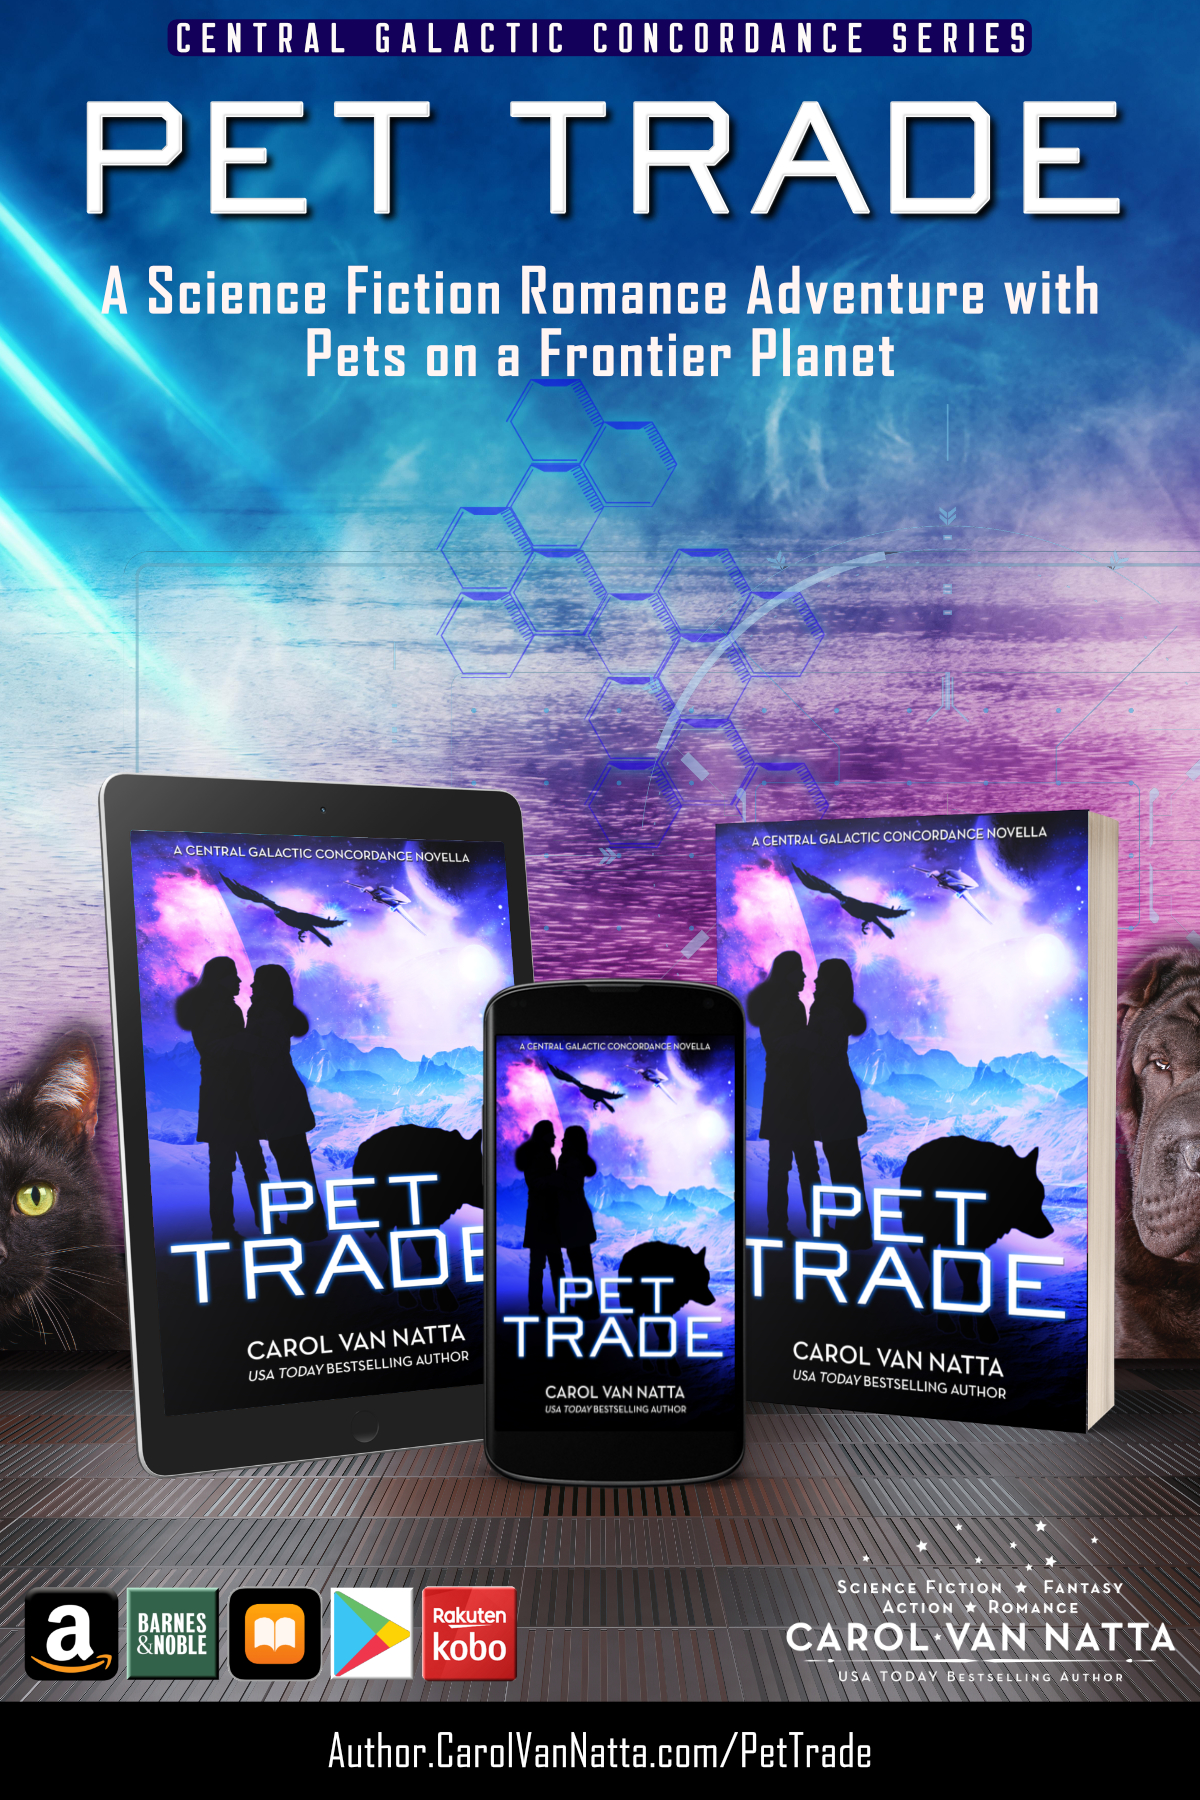 Pet Trade, a science fiction romance adventure with Cyborgs and Pets on a Frontier Planet